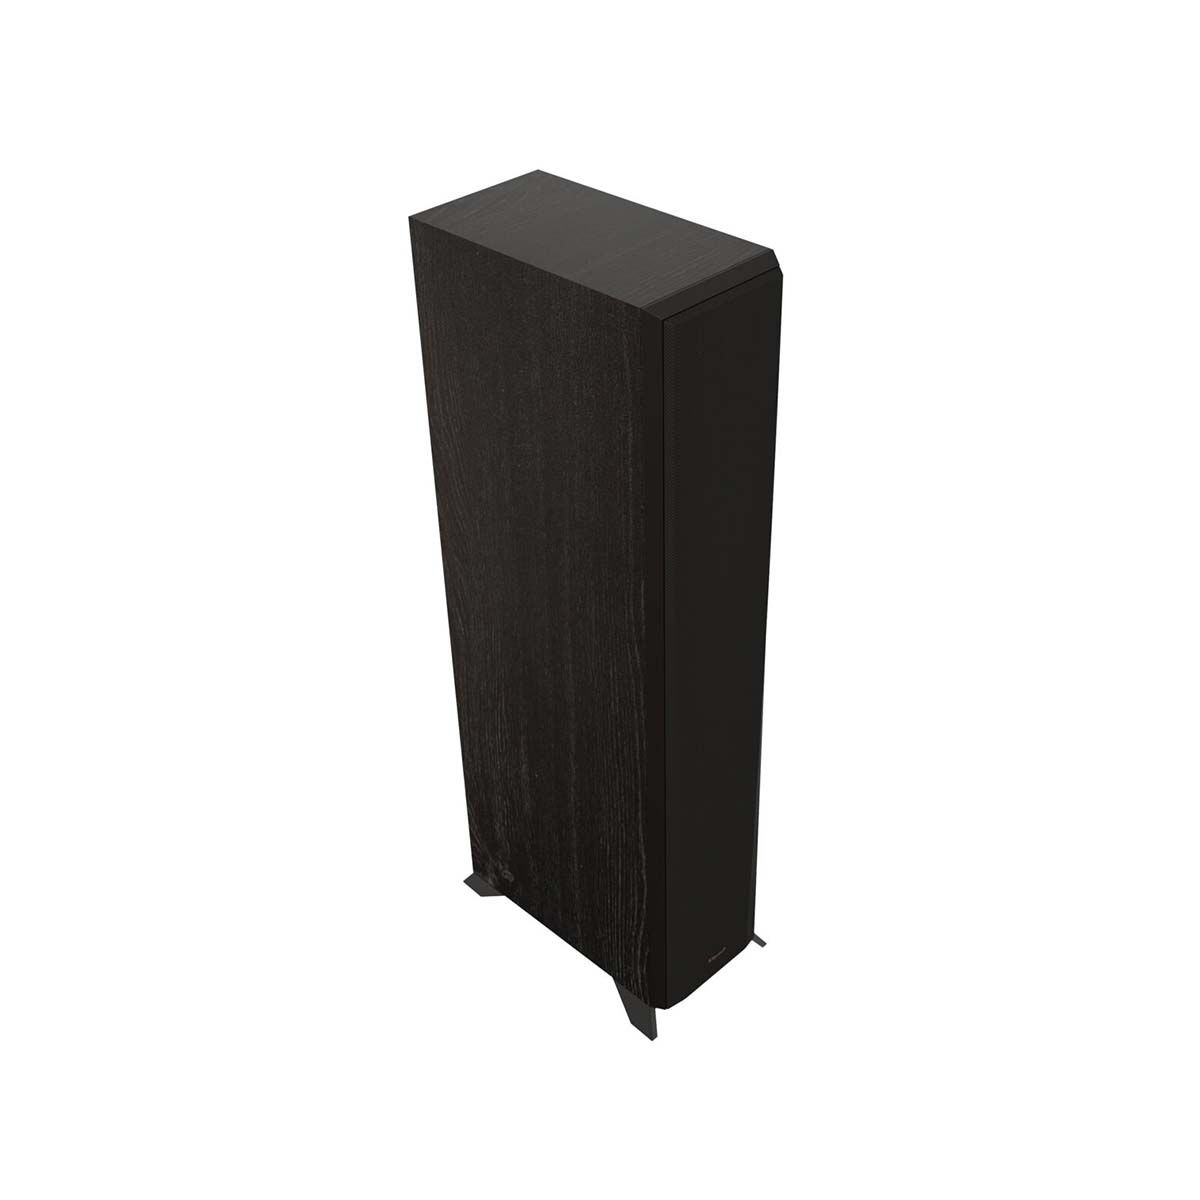 Klipsch RP-5000F II Floorstanding Speaker - Ebony - angled front view with grill